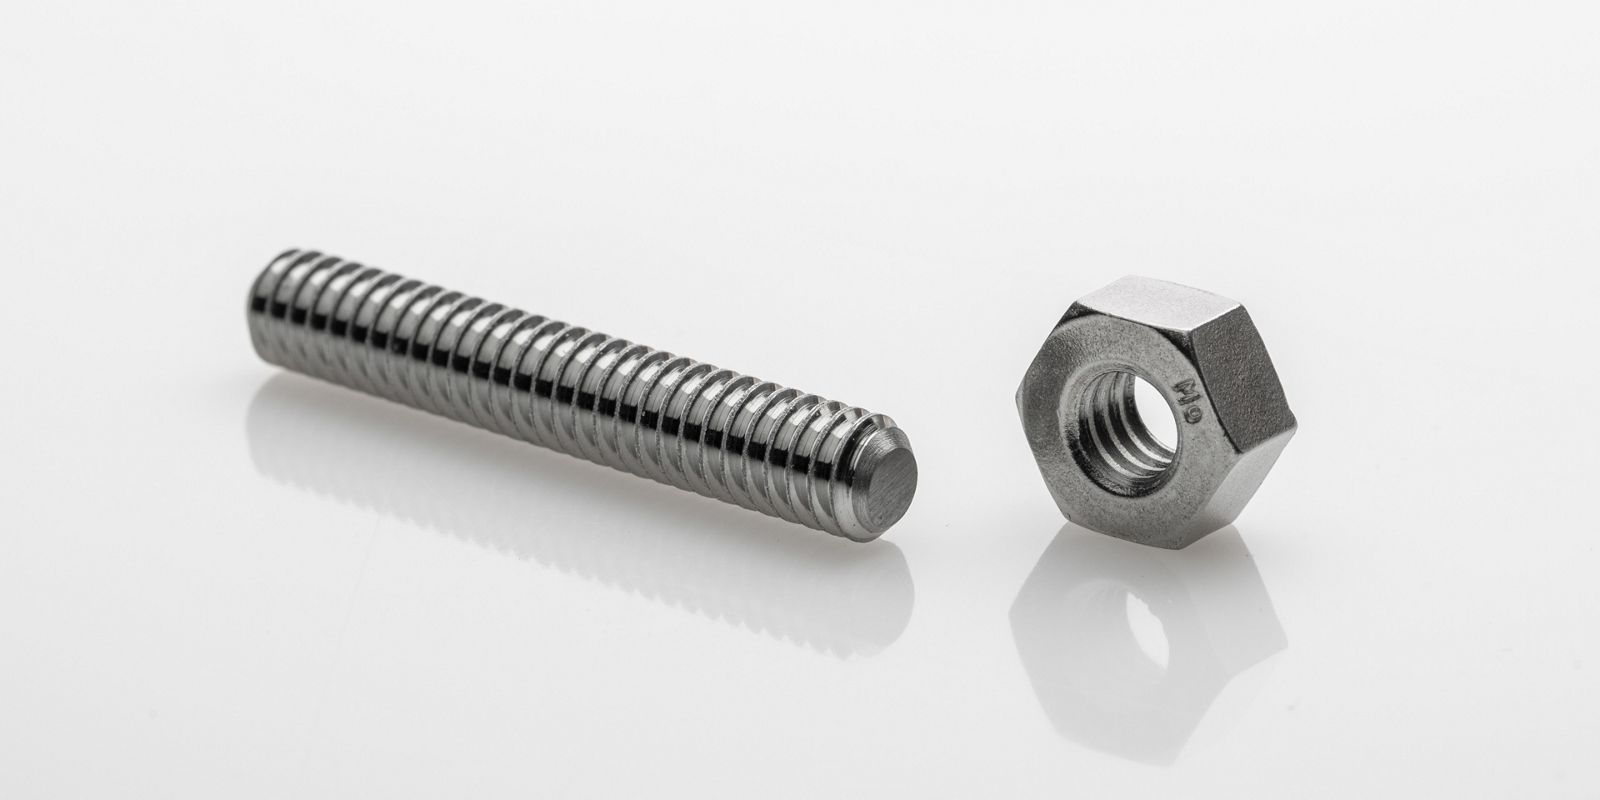 Screws and nuts